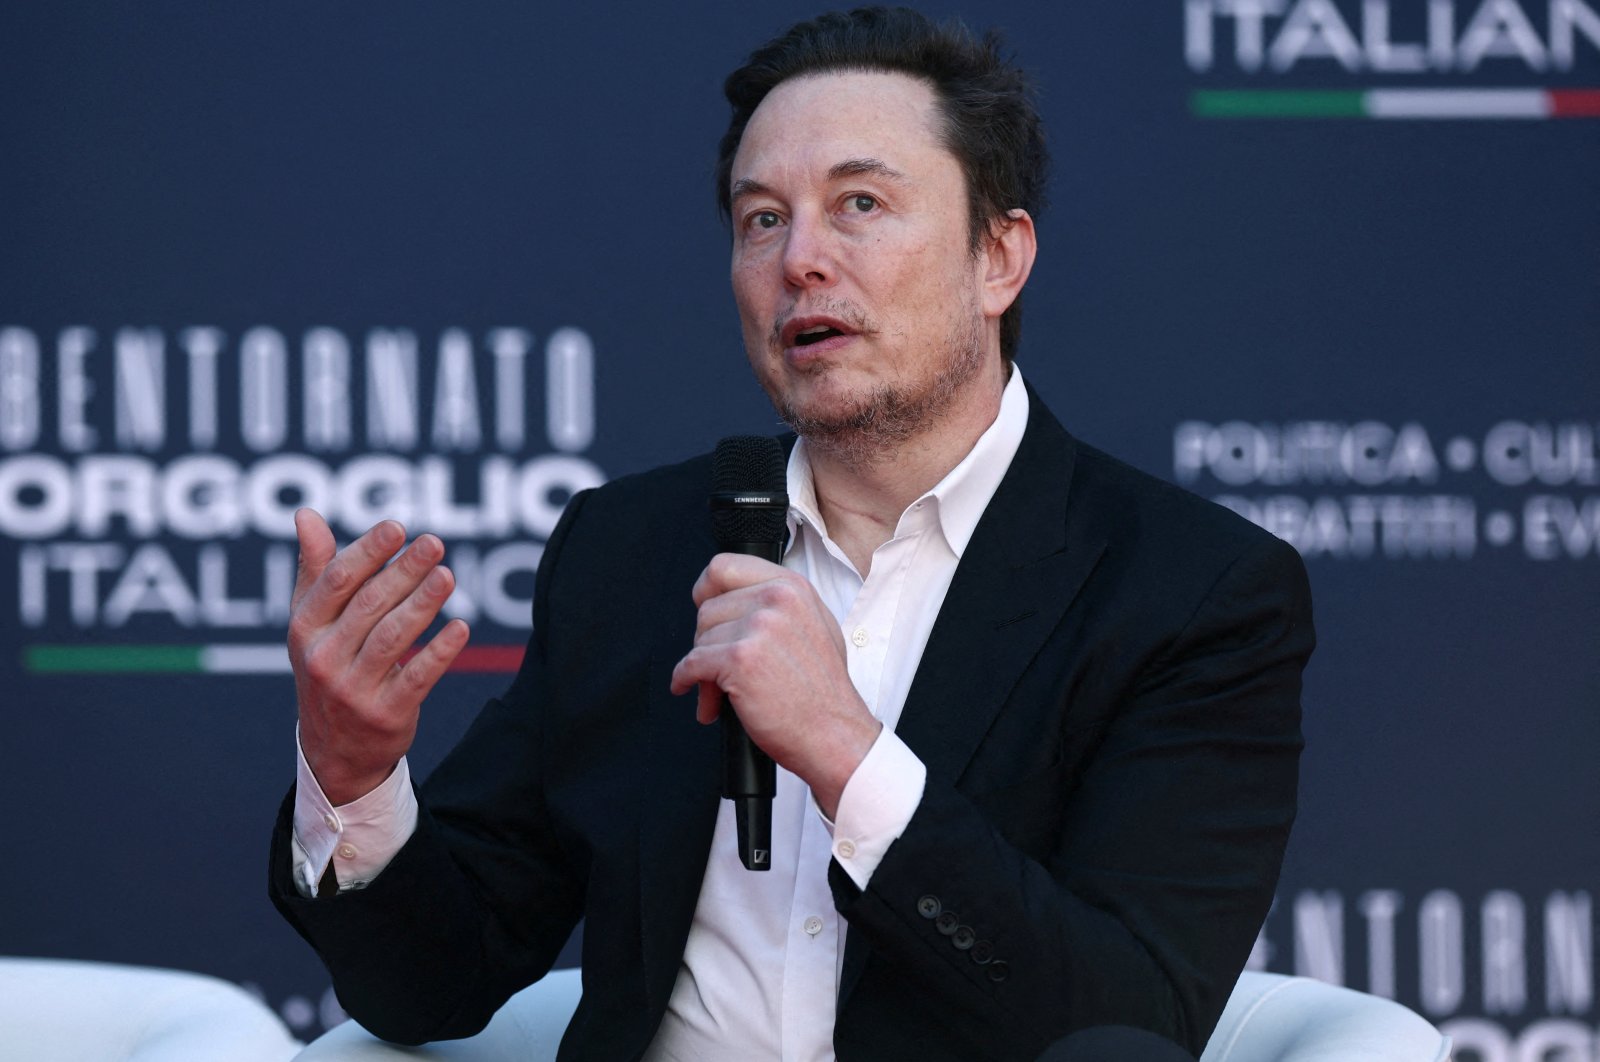 Musk’s Tesla pay package worth over $55B struck down by judge